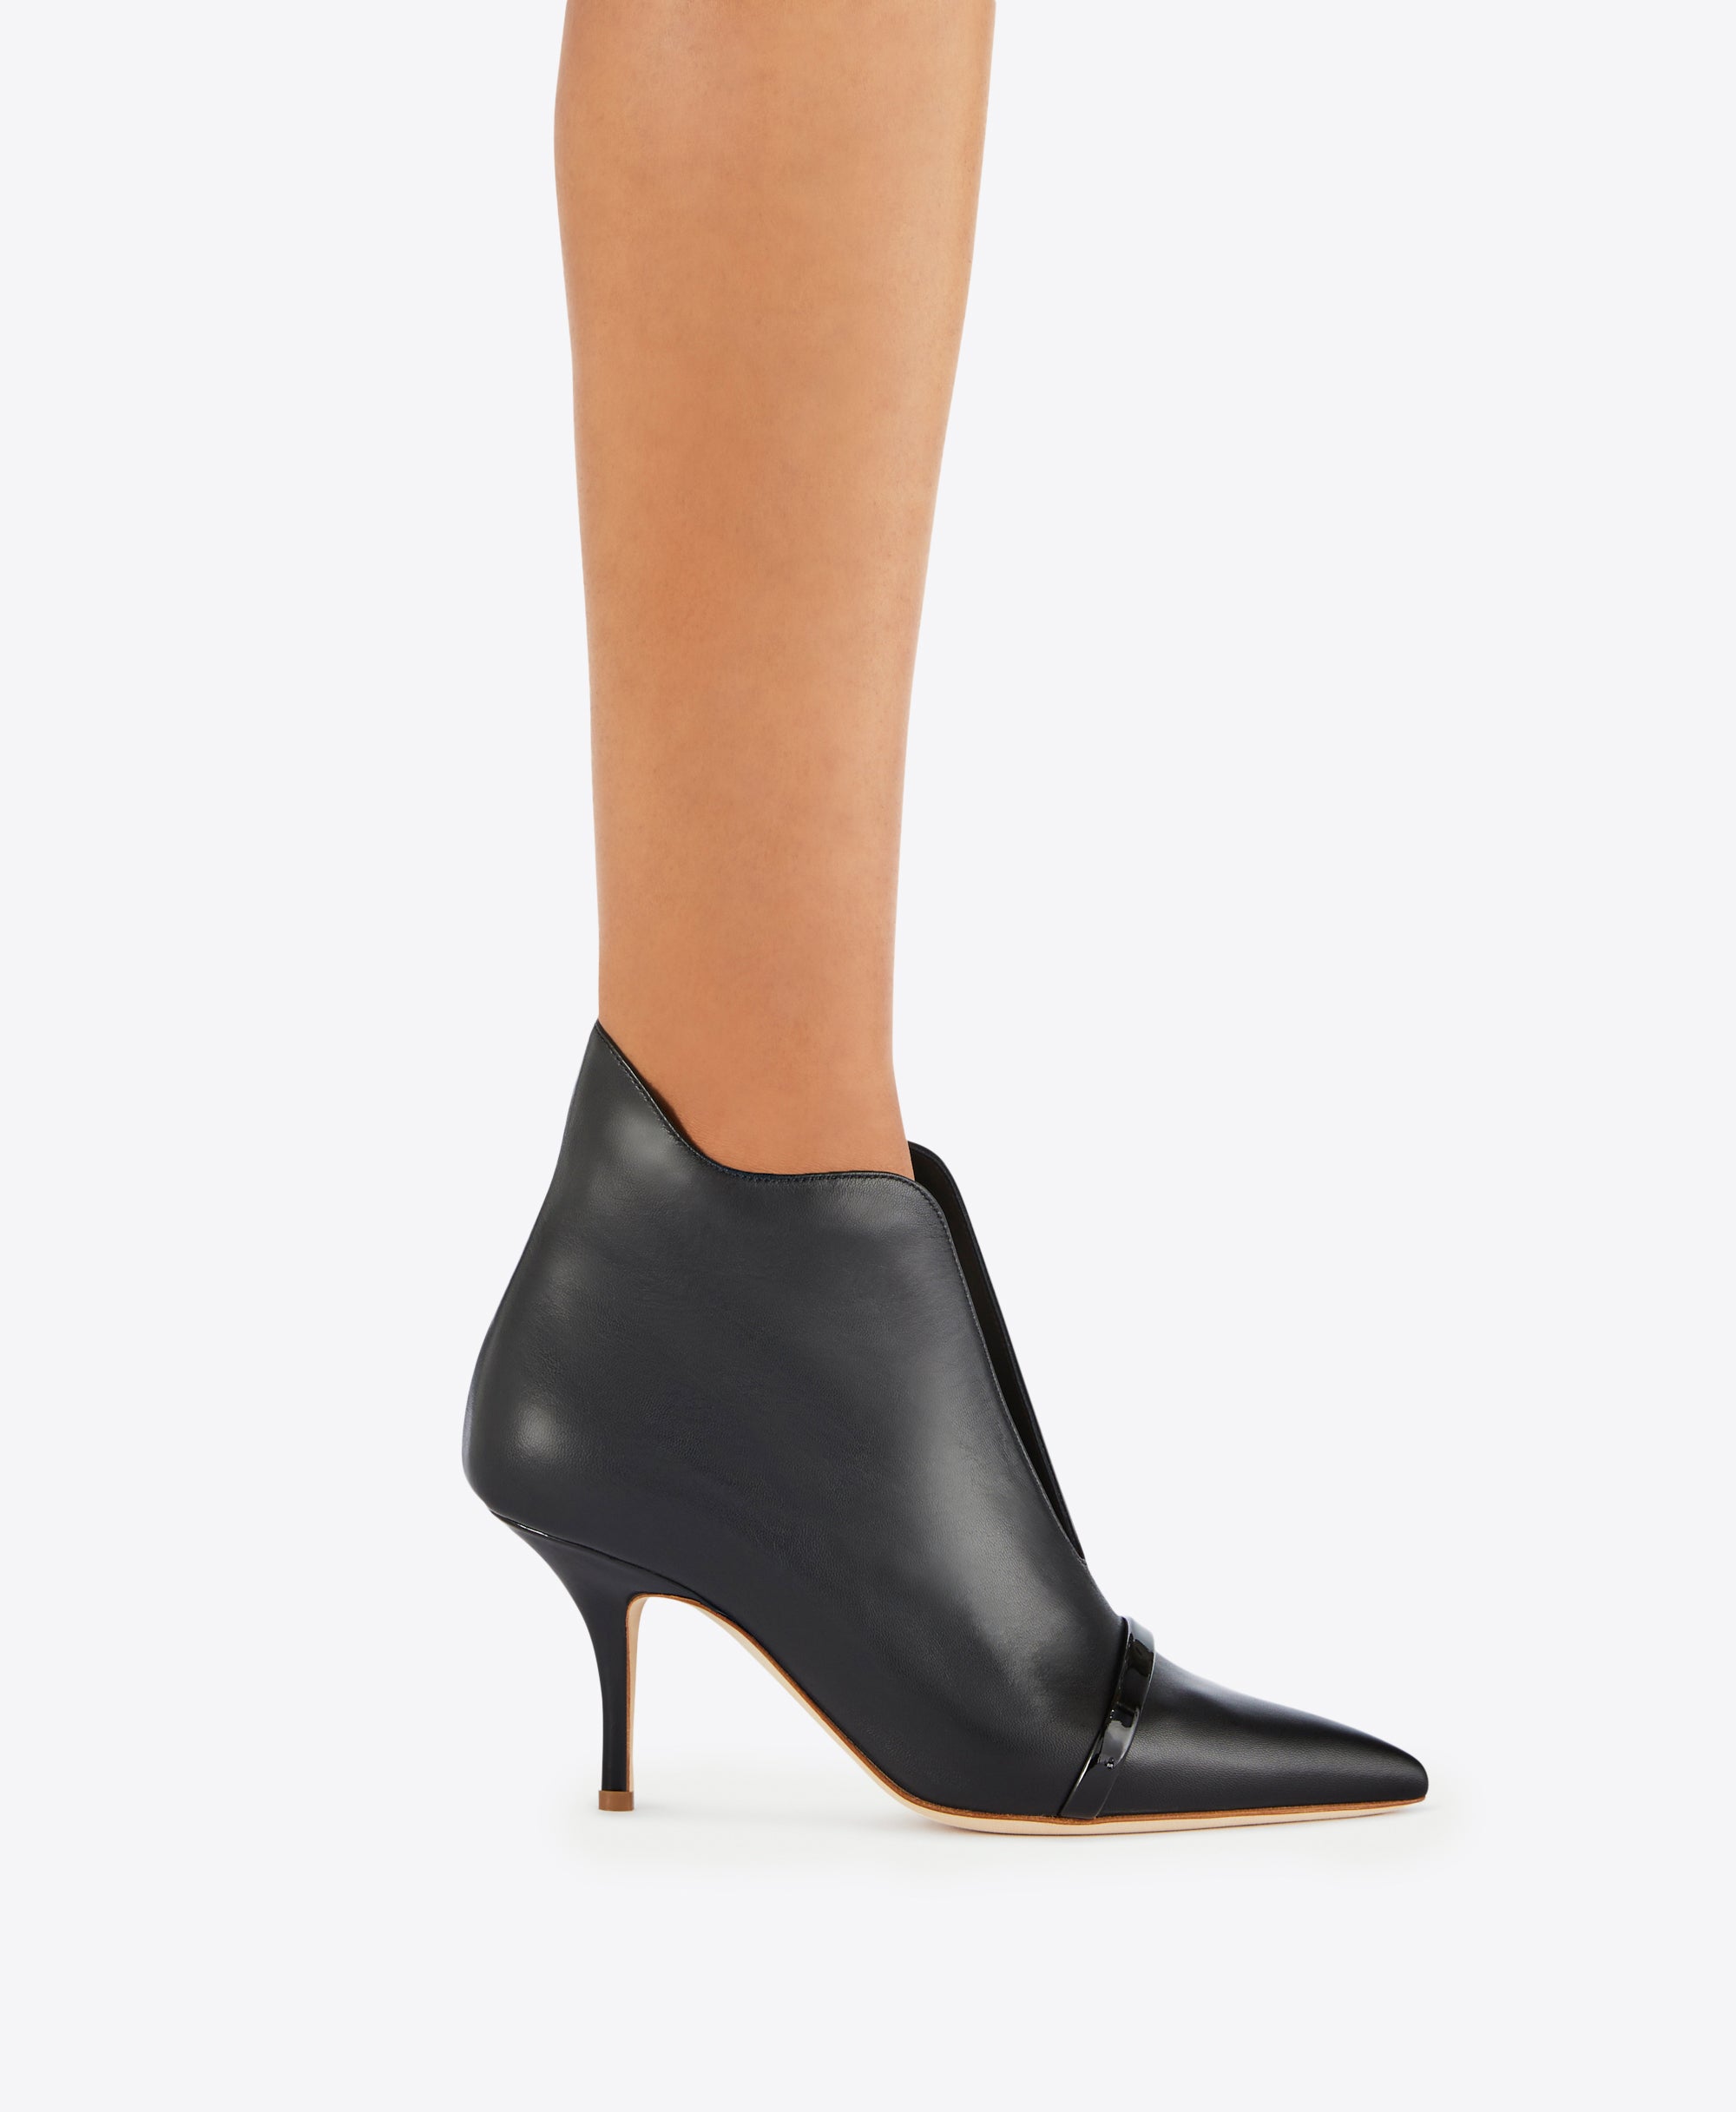 Women's Heeled Boots | Knee High & Ankle | Dune London